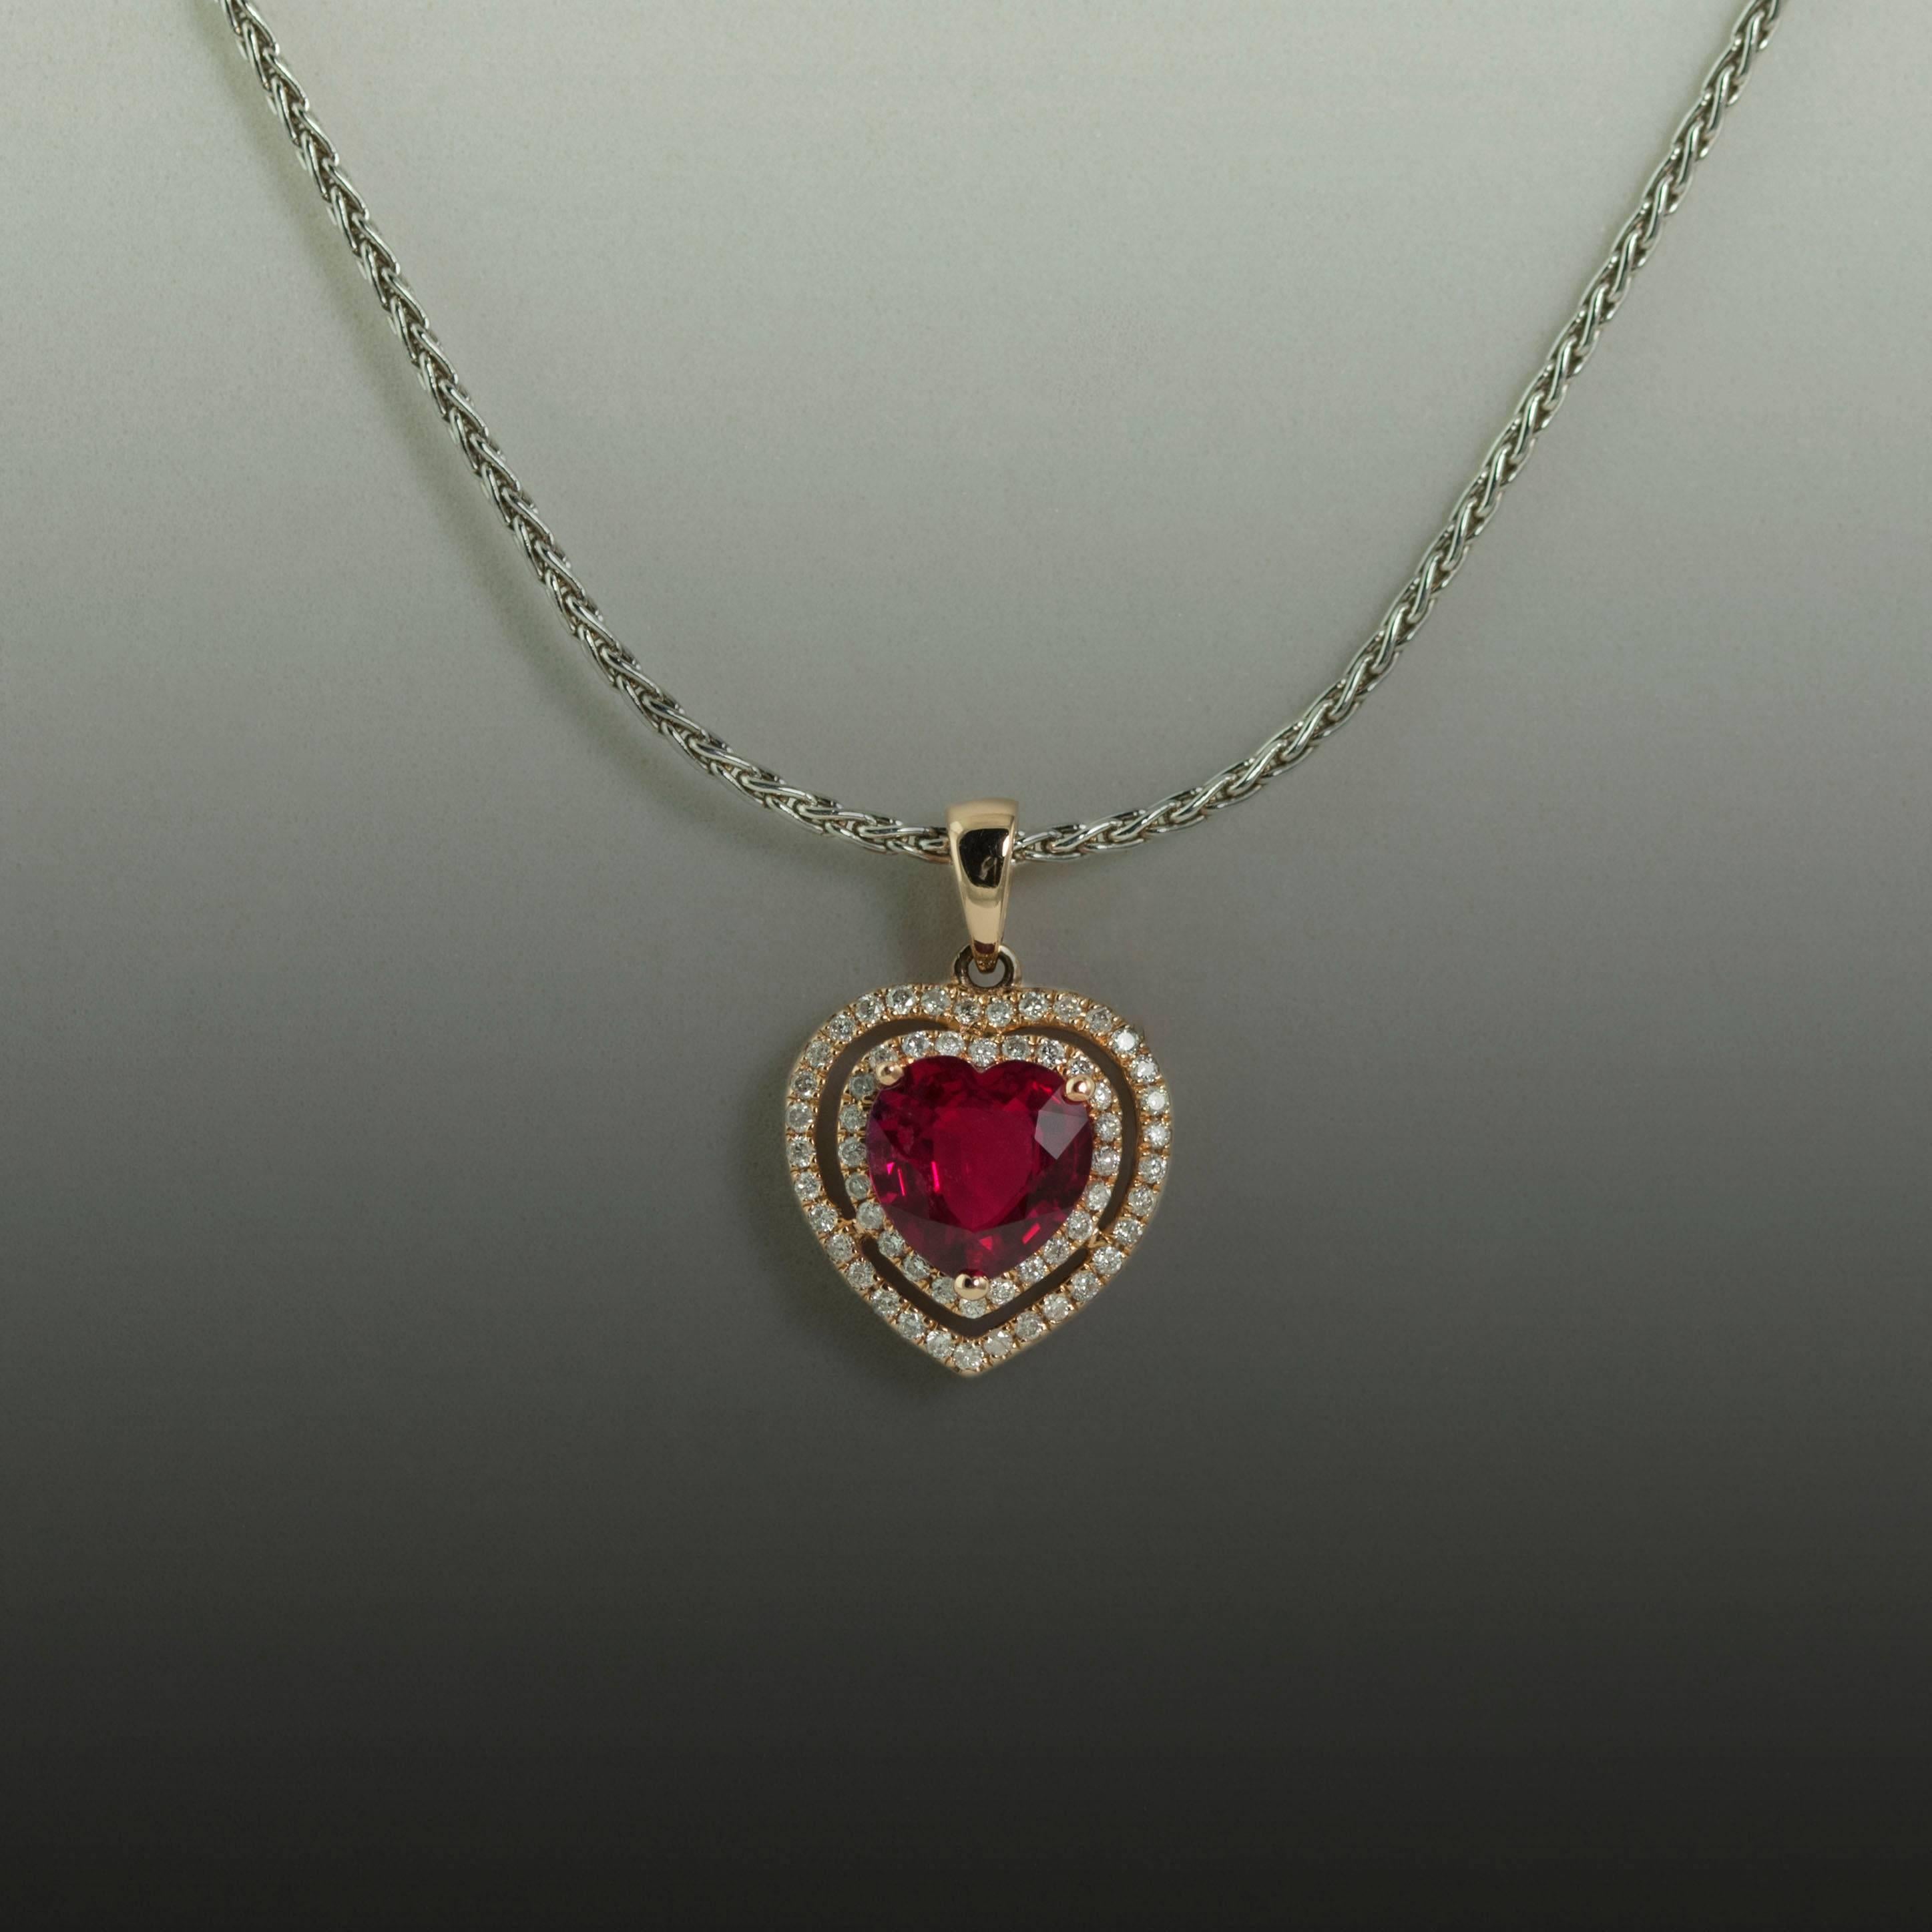 Beautiful 14K Pink Gold Pendant on a 14K White Gold Chain with 1 Heart Shaped Mozambique natural Ruby Weighing 1.58 Carats and 54 Round Diamonds Weighing 0.27 Carats. 